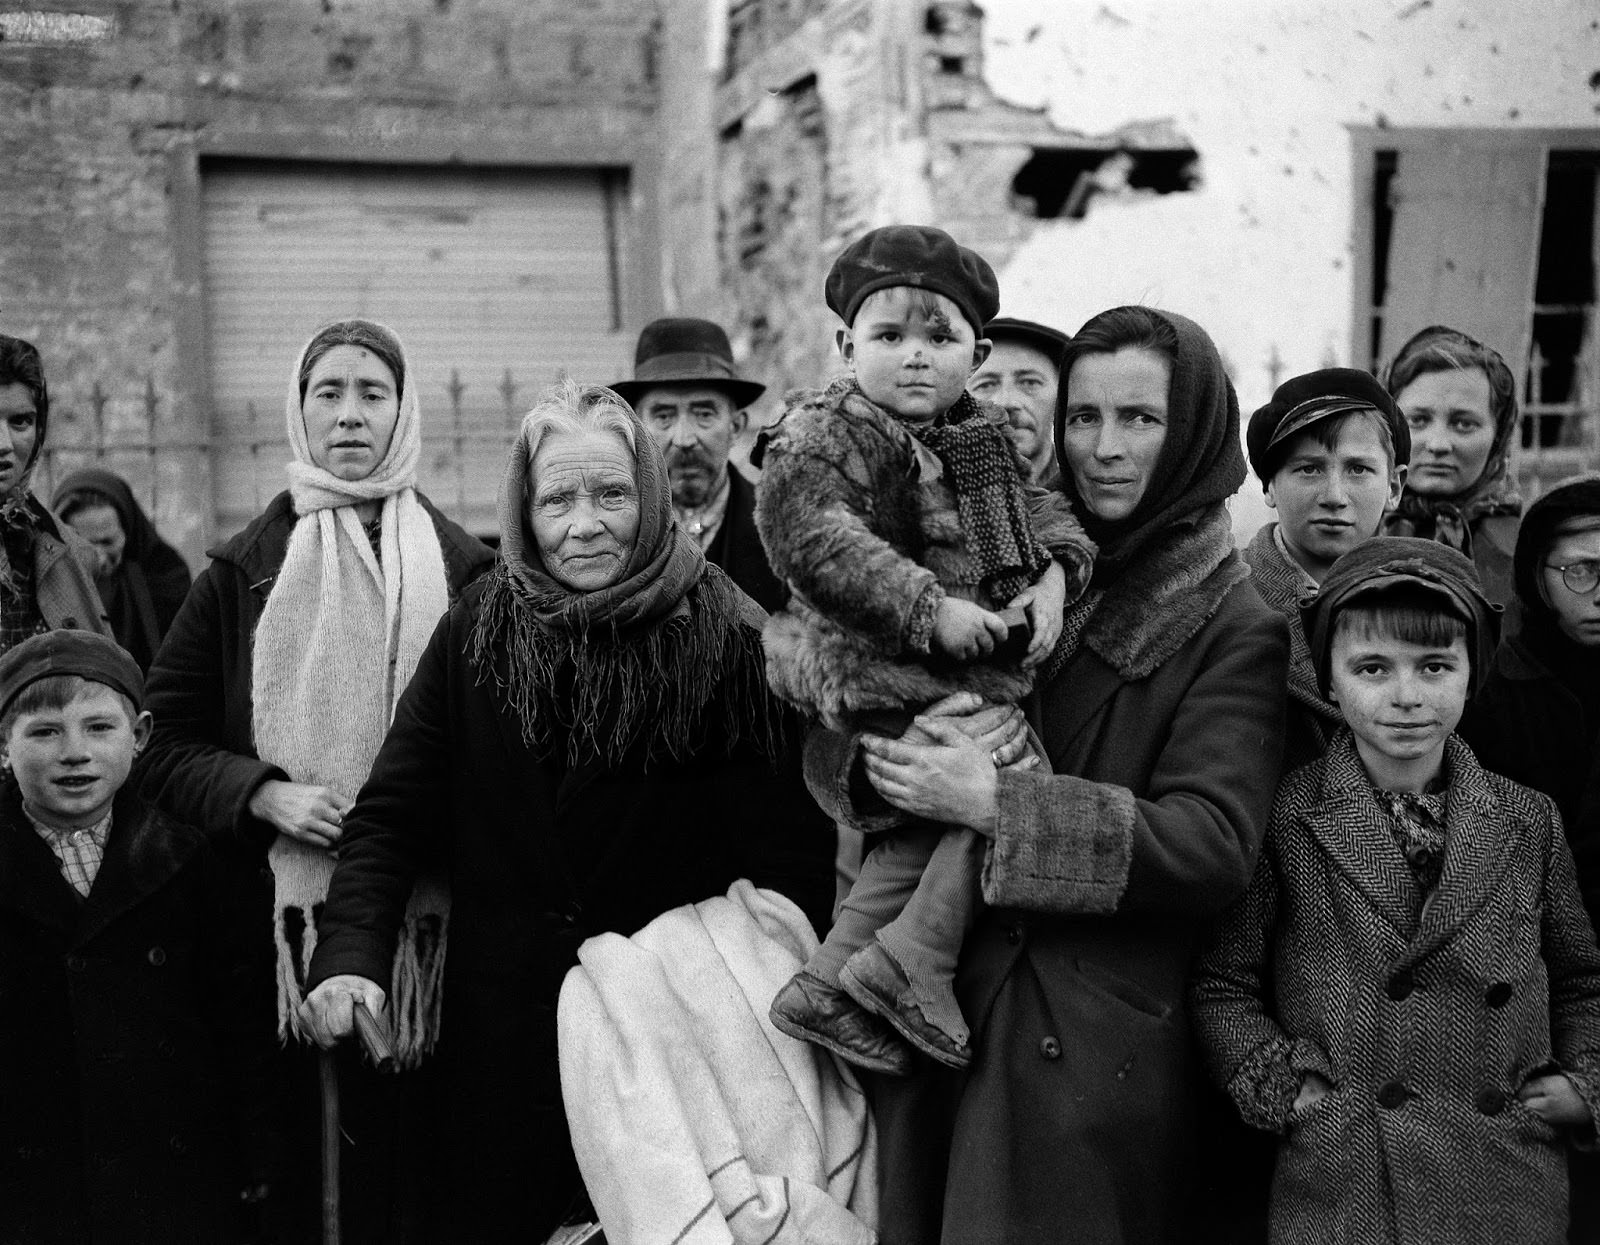 Refugees in La Gleize, Belgium, on Jan. 2, 1945, wait to be transported from the war-torn town after its recapture by American forces during the German thrust into the Belgium-Luxembourg salient.